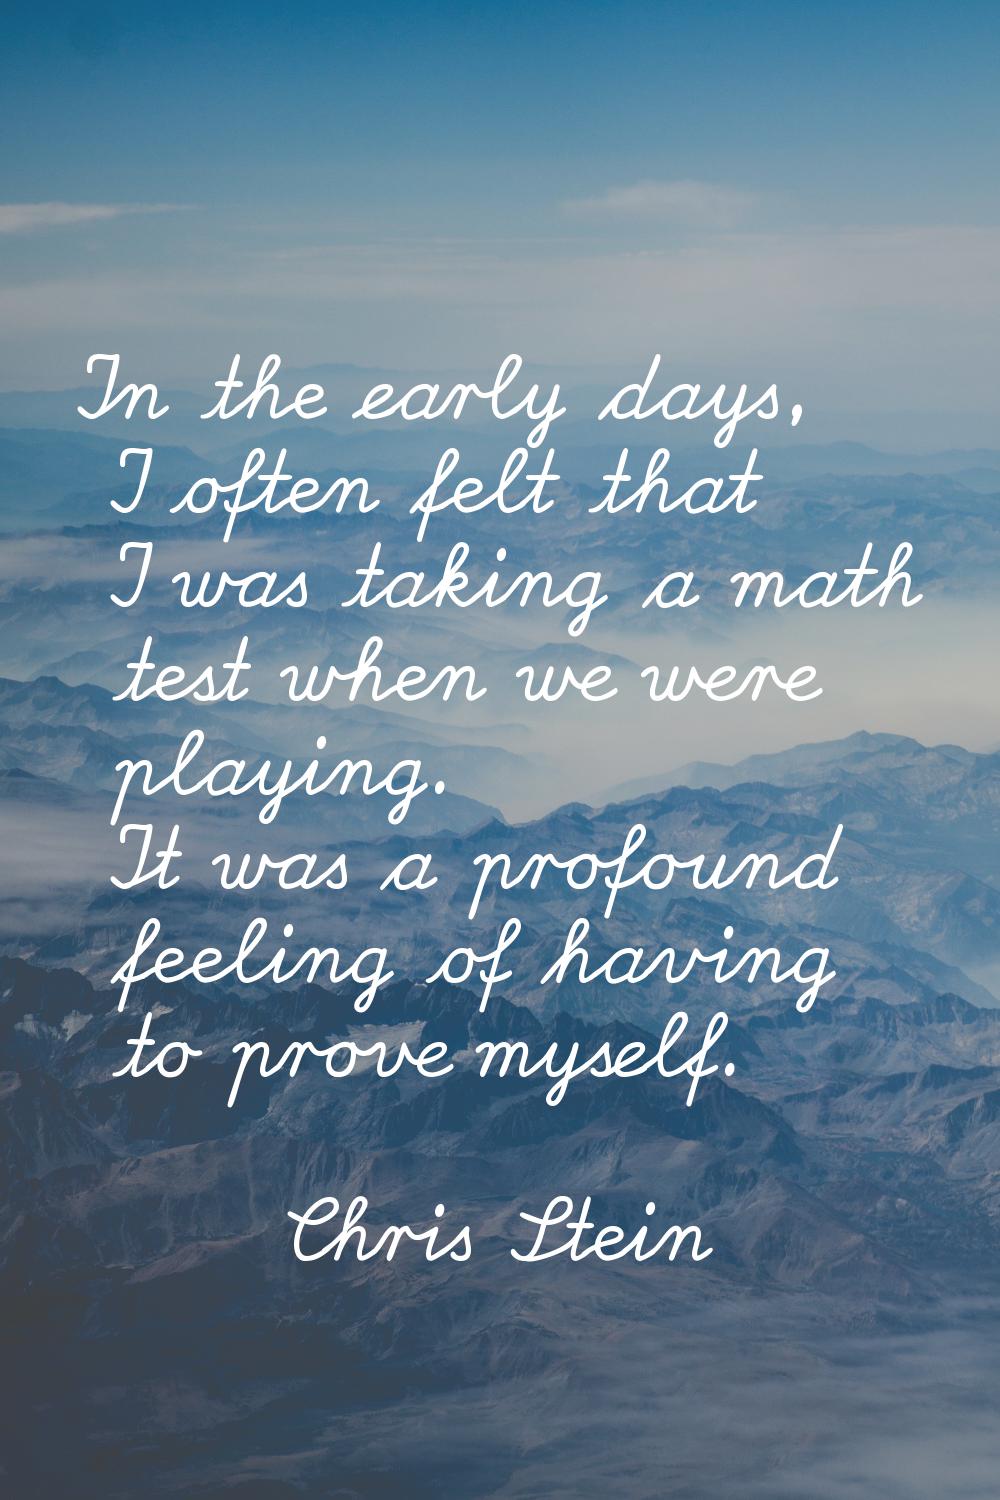 In the early days, I often felt that I was taking a math test when we were playing. It was a profou